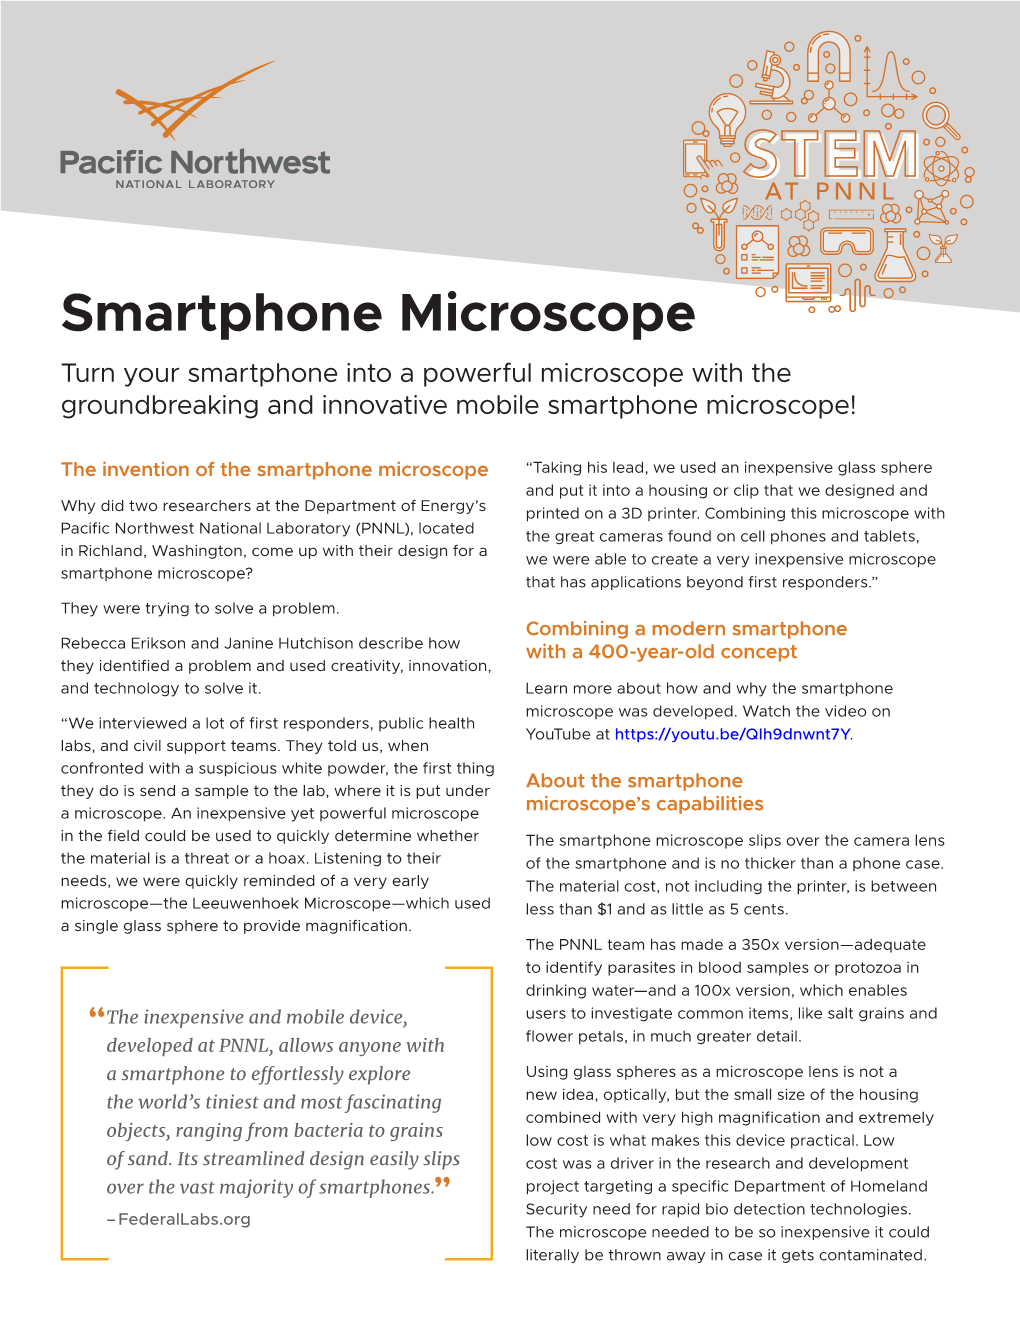 Smartphone Microscope Turn Your Smartphone Into a Powerful Microscope with the Groundbreaking and Innovative Mobile Smartphone Microscope!